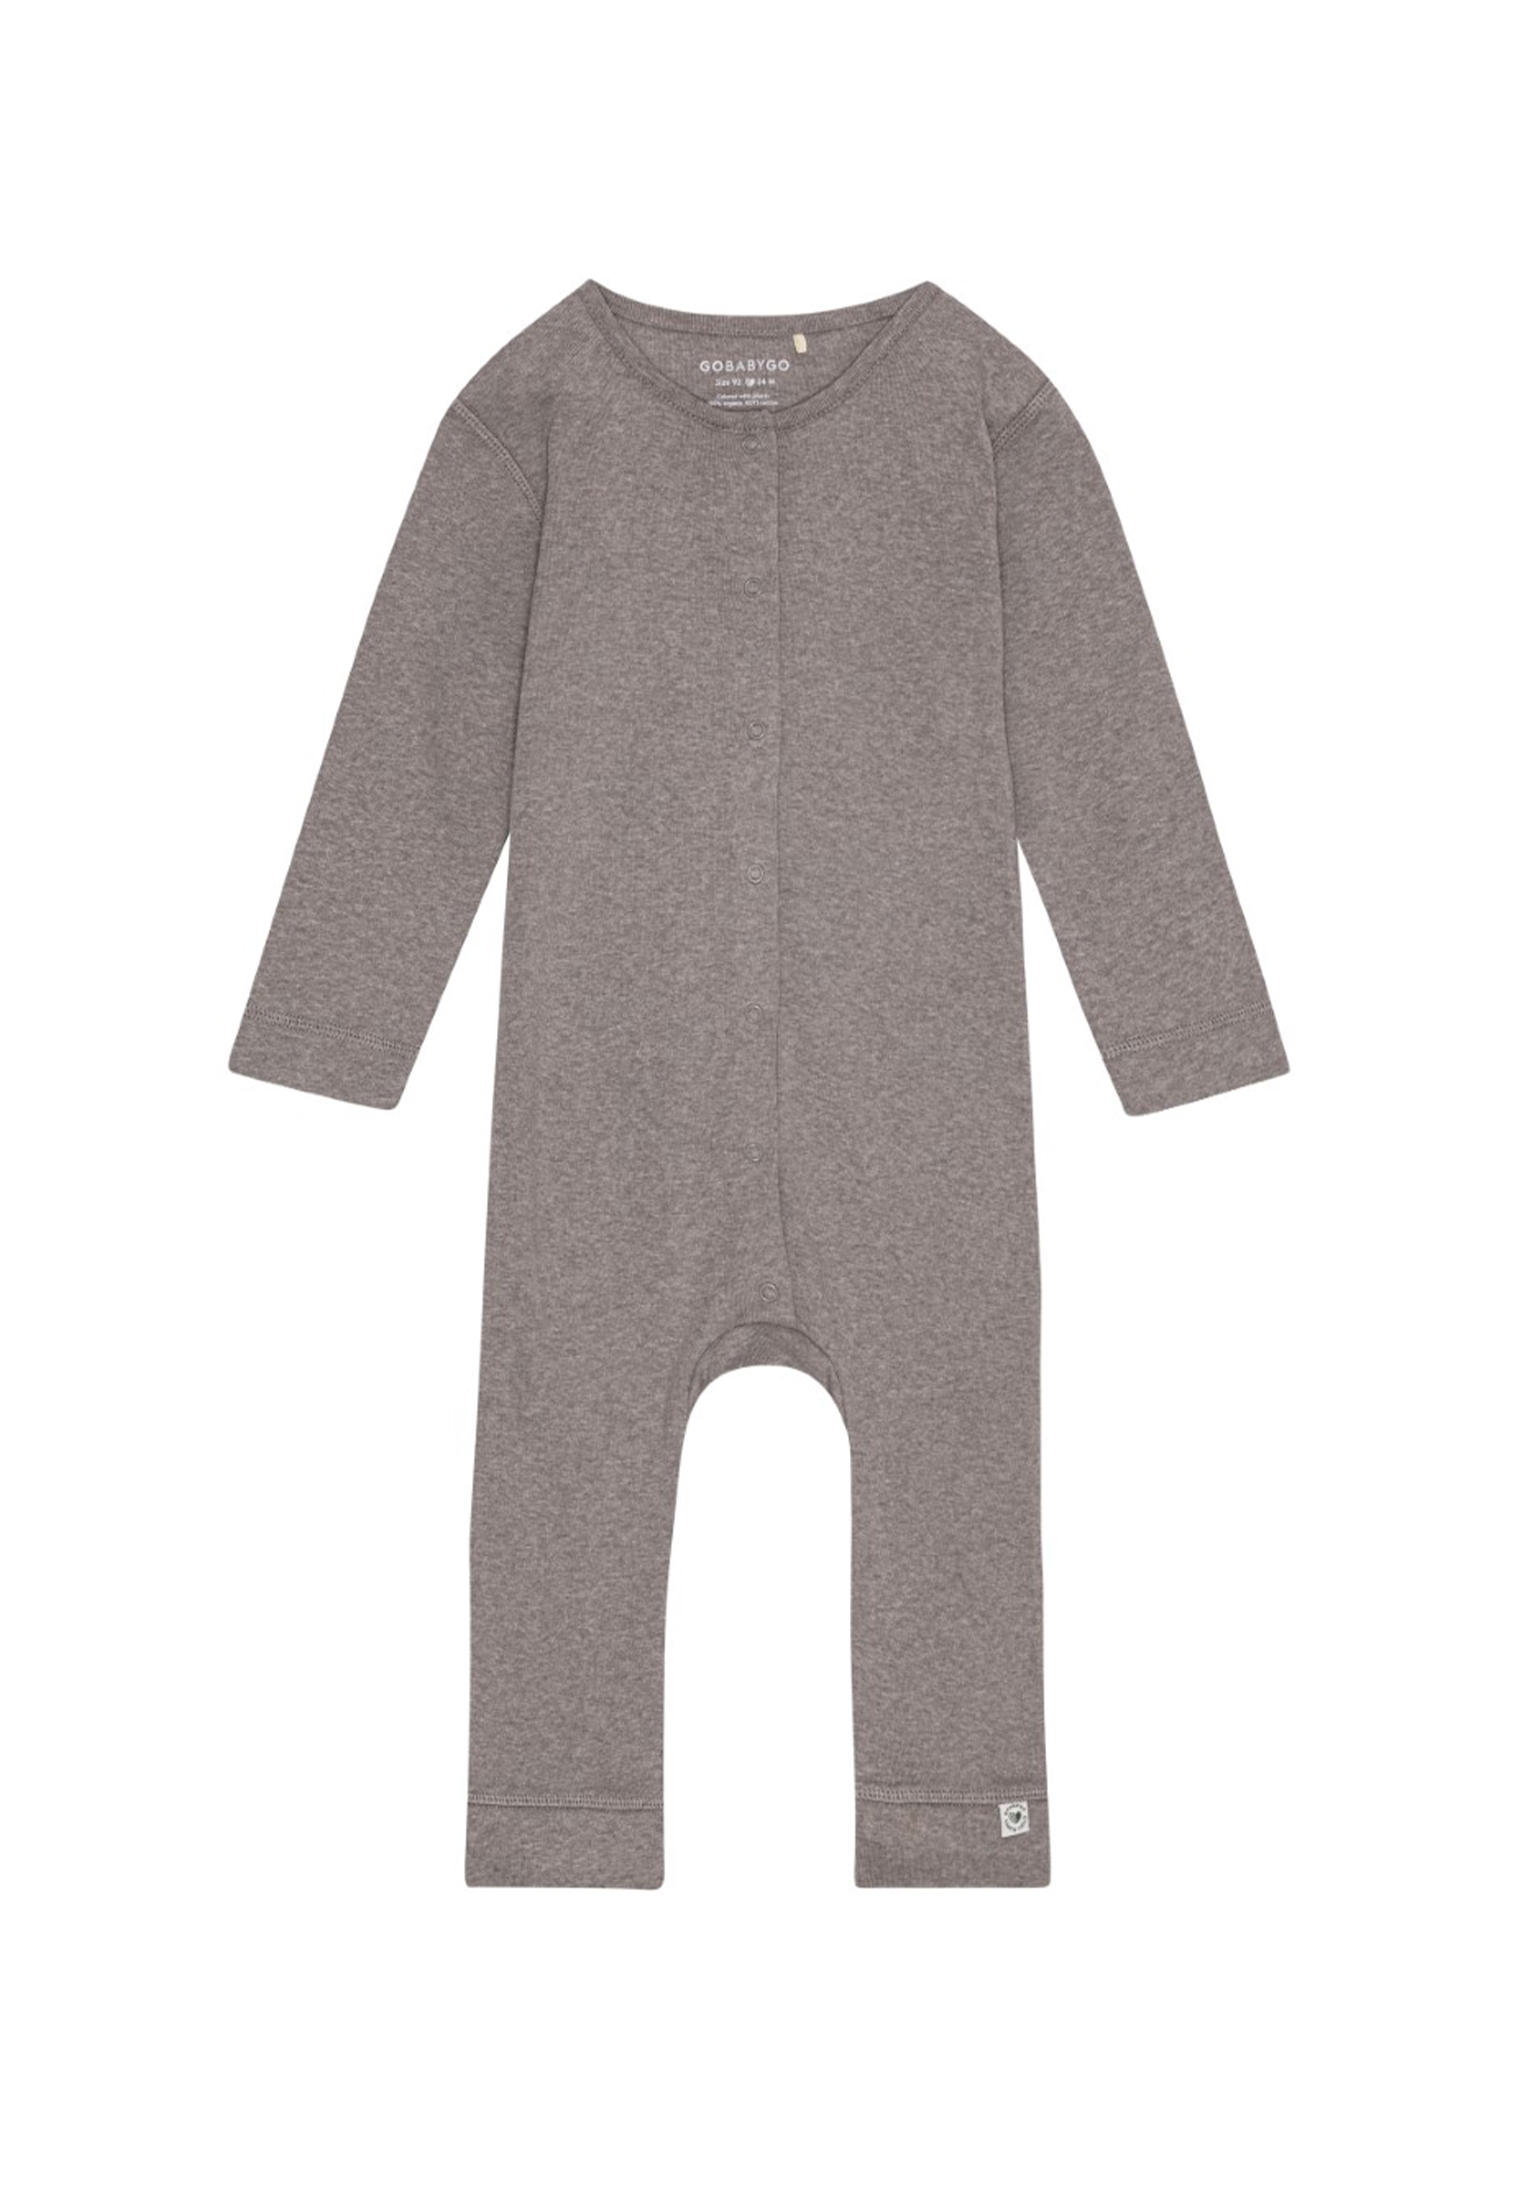 MAMA.LICIOUS Baby one-piece suit -Ash - 33333323